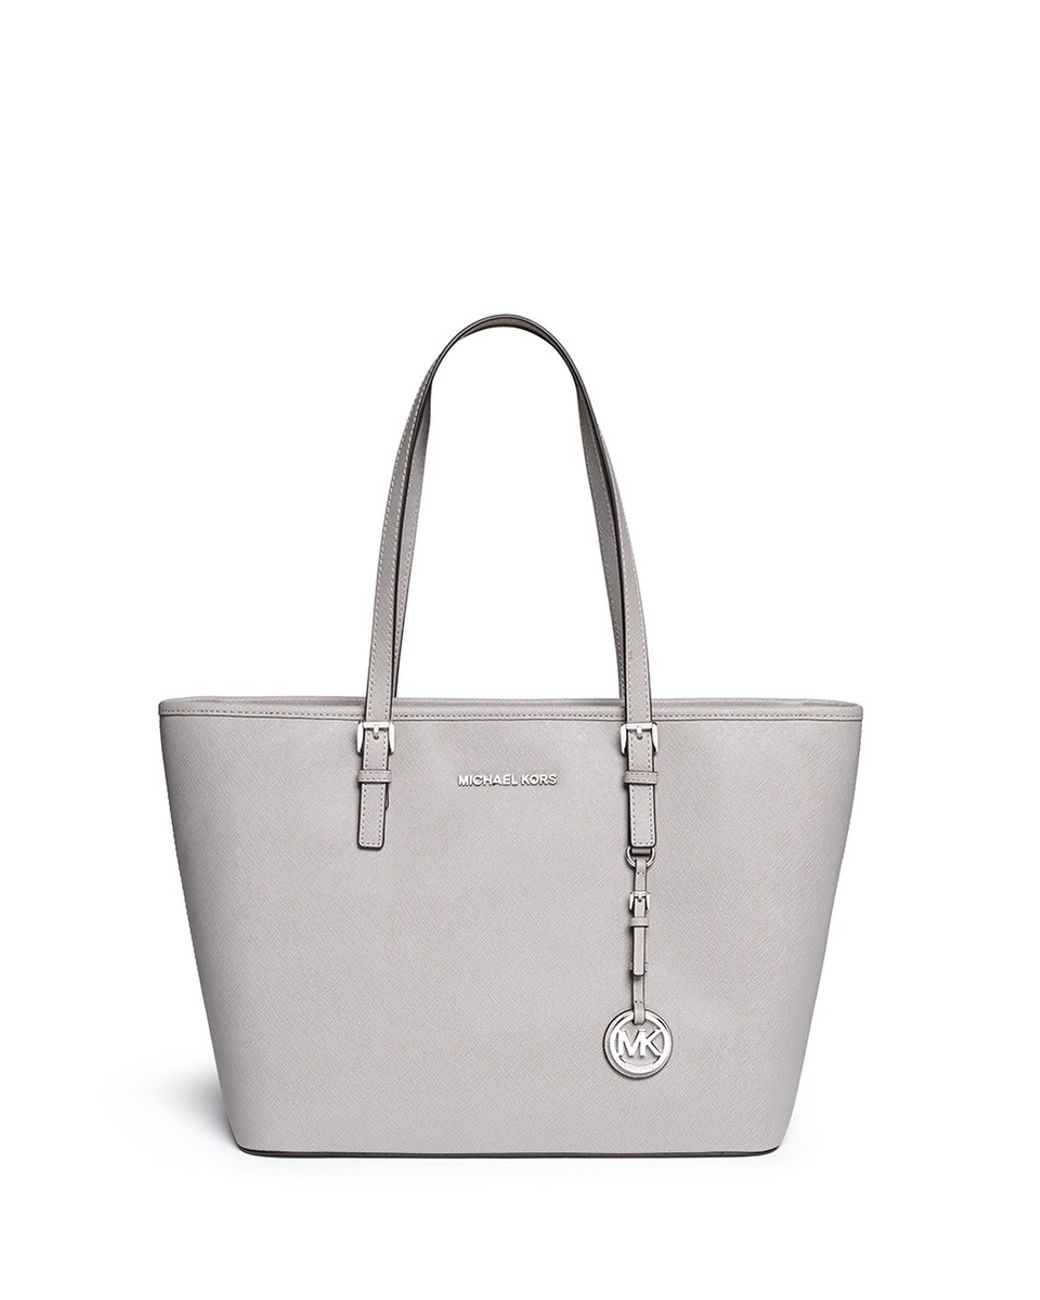 Michael Kors 'jet Set Travel' Saffiano Leather Top Zip Tote in Gray | Lyst